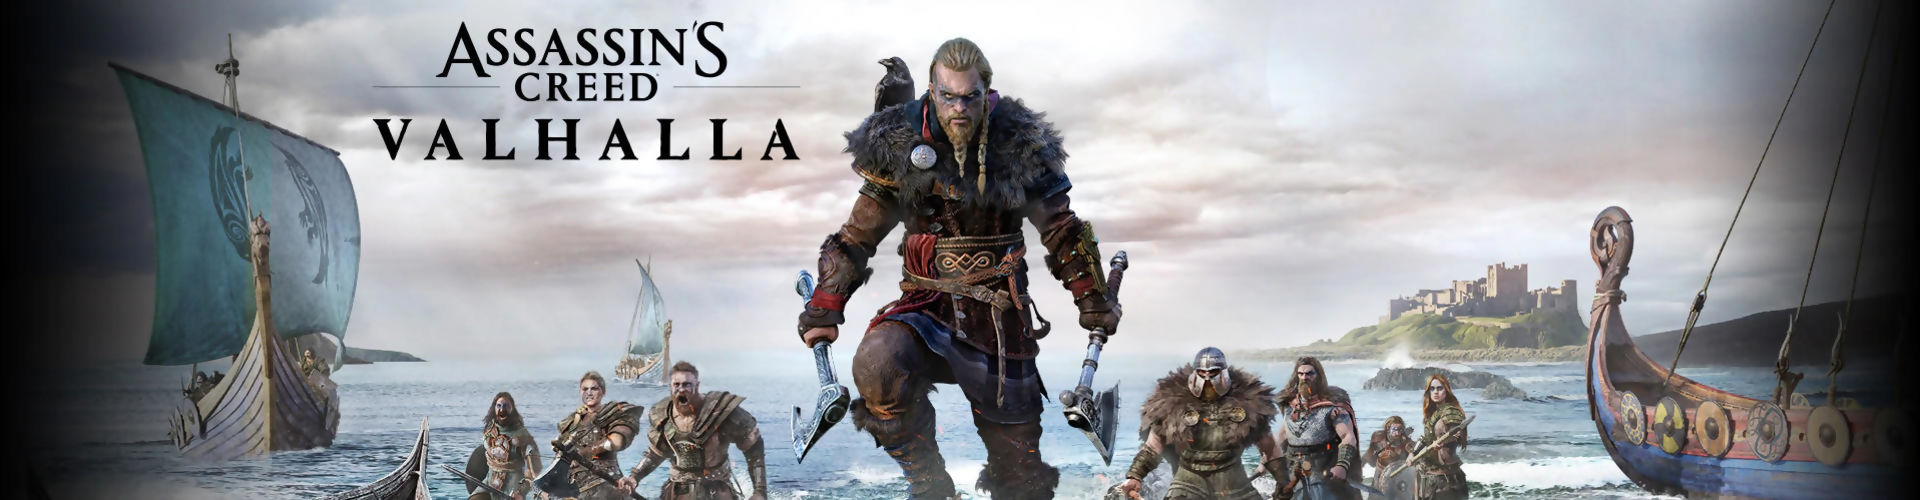 Check out all the Assassin's Creed Valhalla reviews